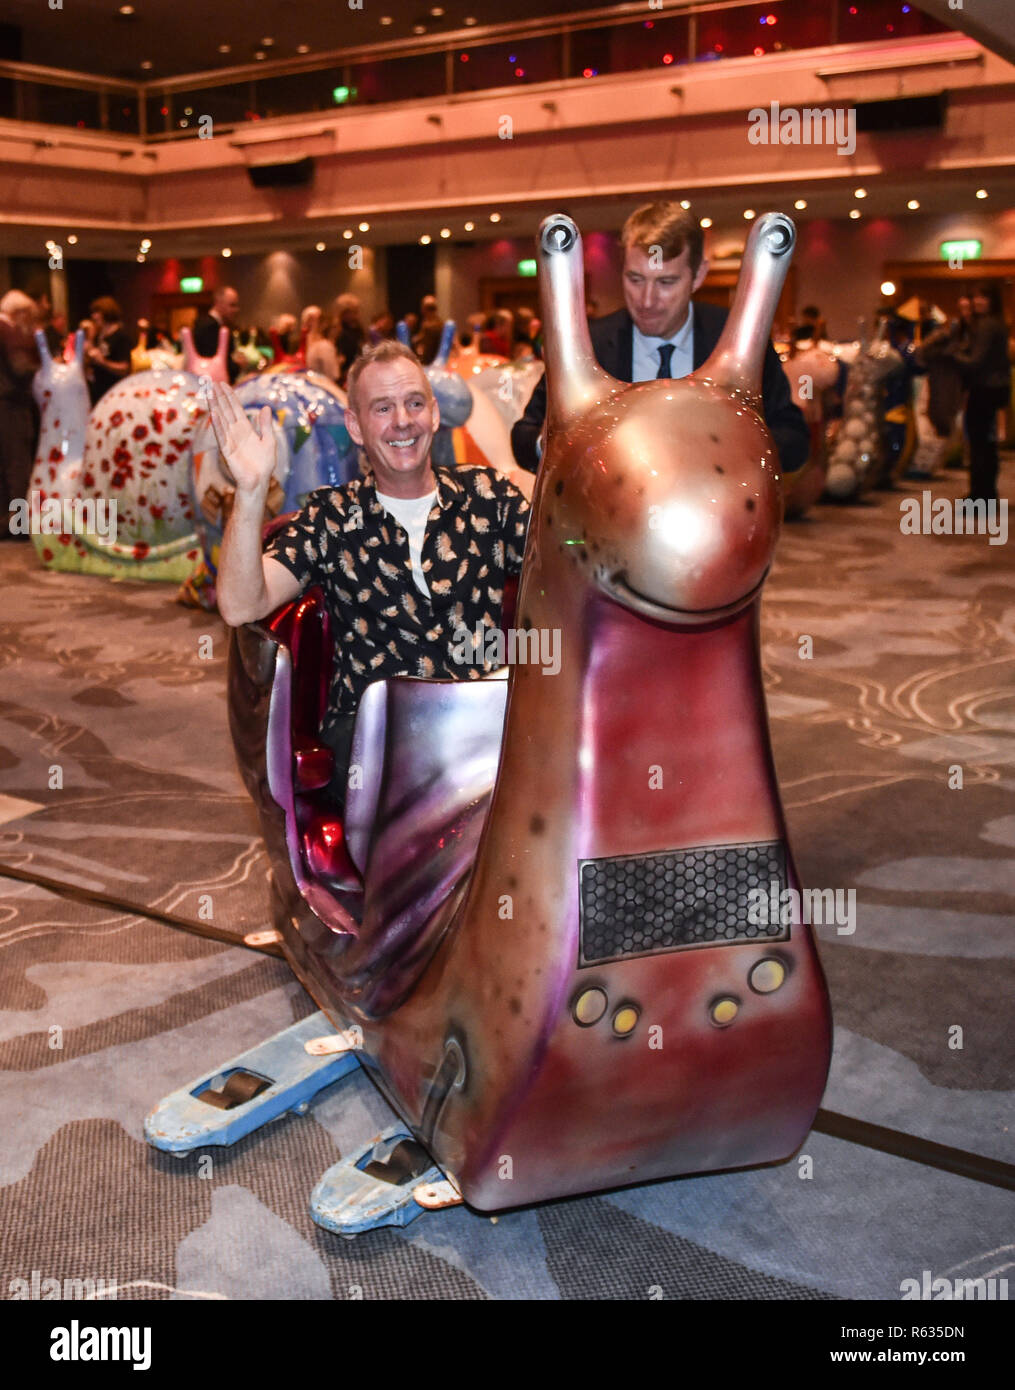 Brighton UK 3rd December 2018 -Norman Cook aka Fat Boy Slim at the auction for the Snailspace snail sculptures held in the Hilton Metropole Hotel Brighton tonight . The snails have been on display around the city since September and the money raised from the auction will go towards the local Martlets Hospice . Credit: Simon Dack/Alamy Live News Stock Photo